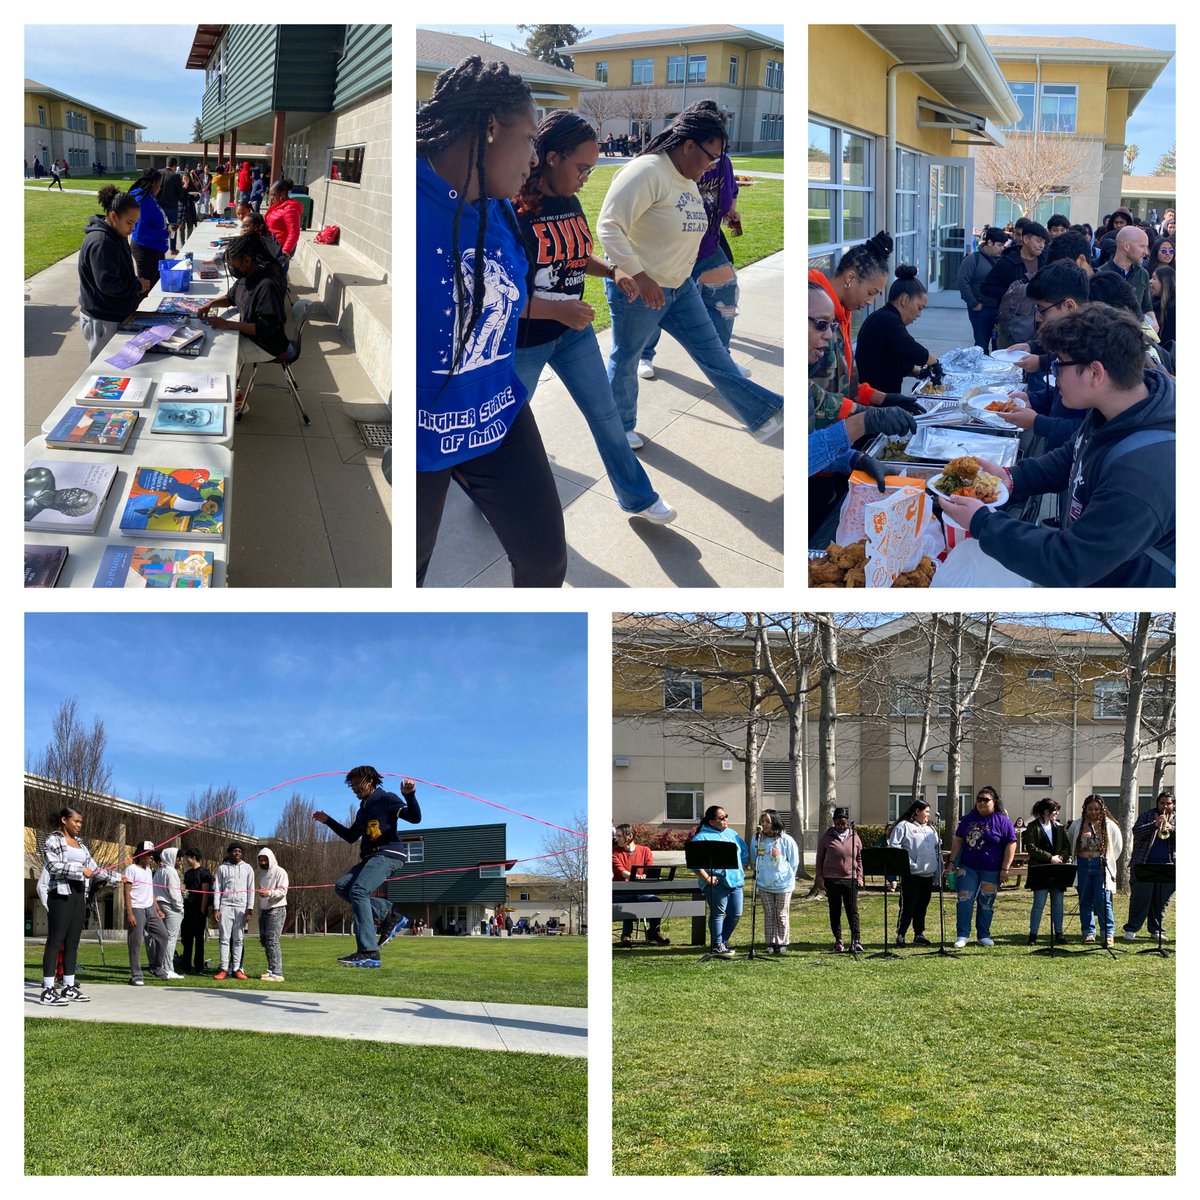 Happy #BlackHistoryMonth! Our Black Student Union organized a great celebration during lunch today, complete with live performances, a delicious meal prepared by Eastside parents and family members, fun games, and more.